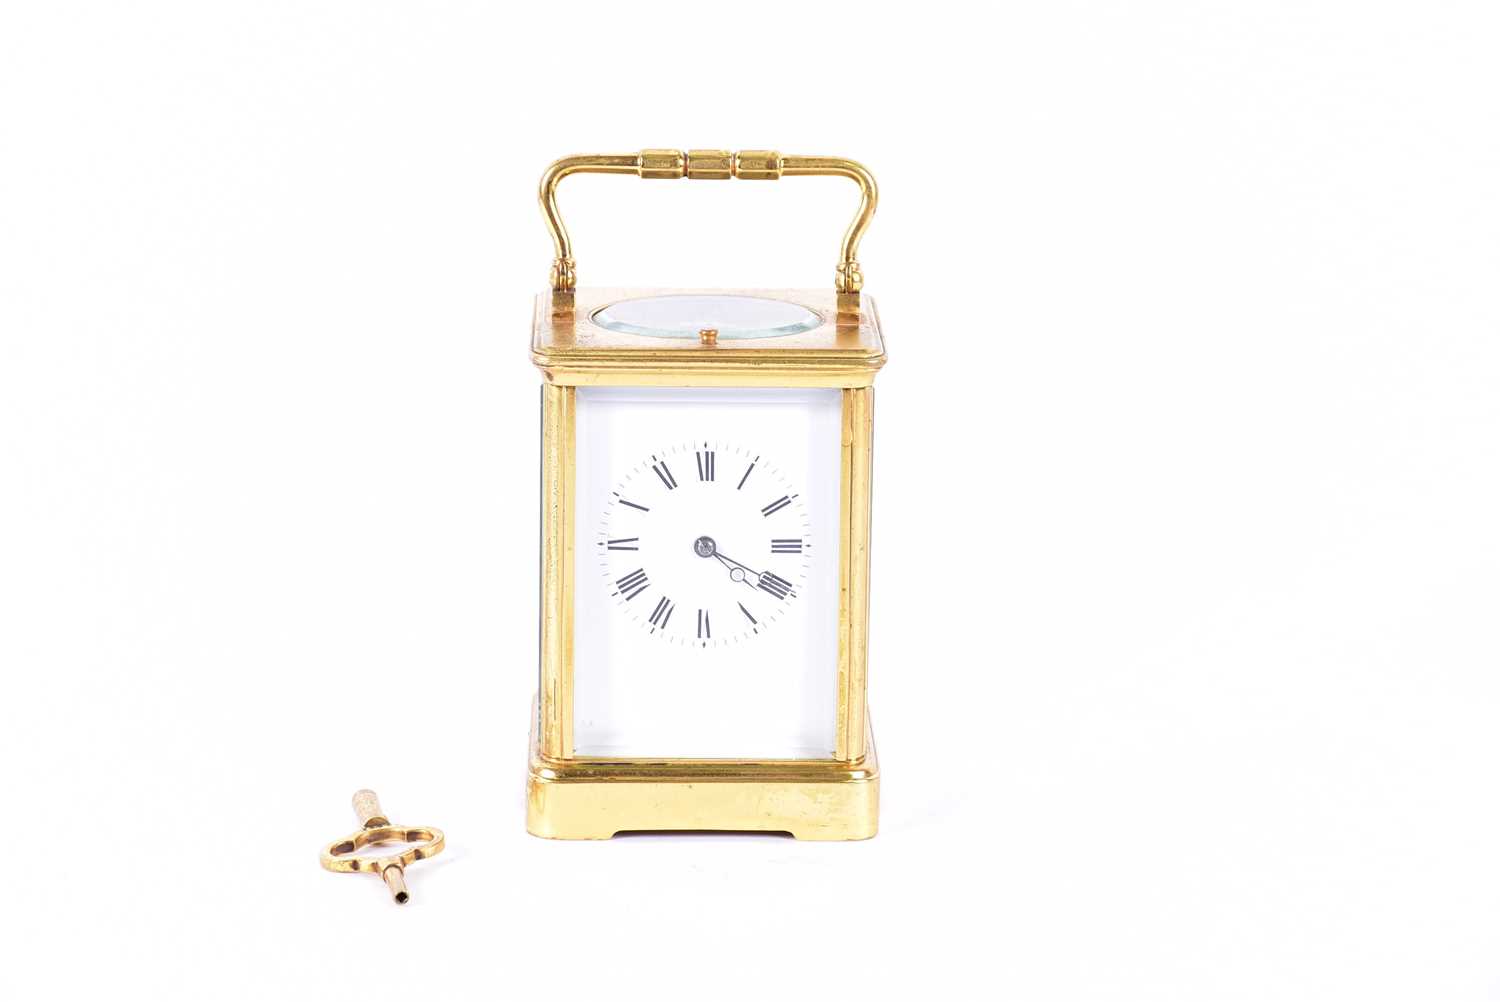 An early 20th century 8-day repeating carriage clock. With gilt brass corniche case. The movement